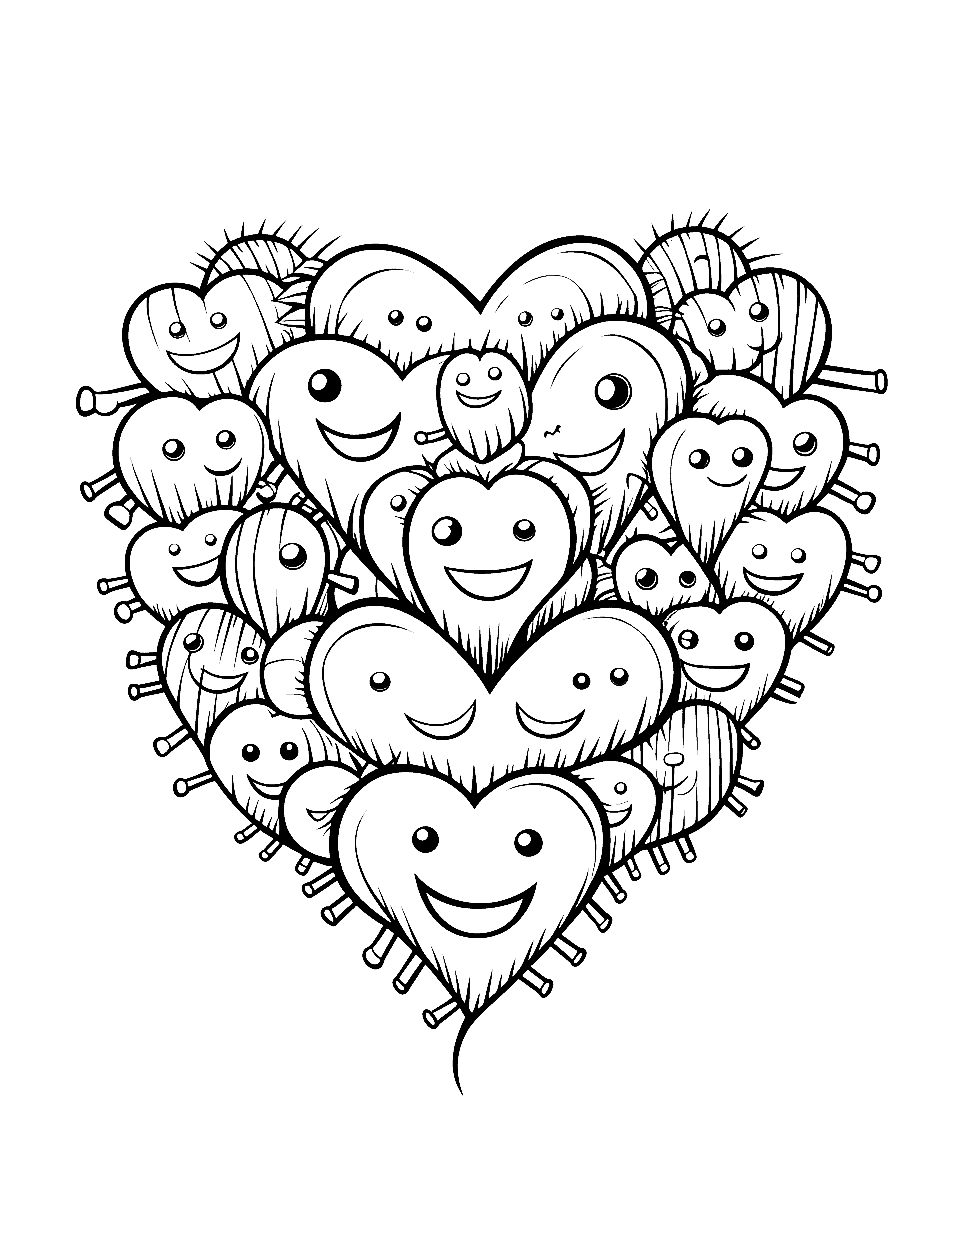 Heart Monster Coloring Page - Cute little monsters in a heart shape.